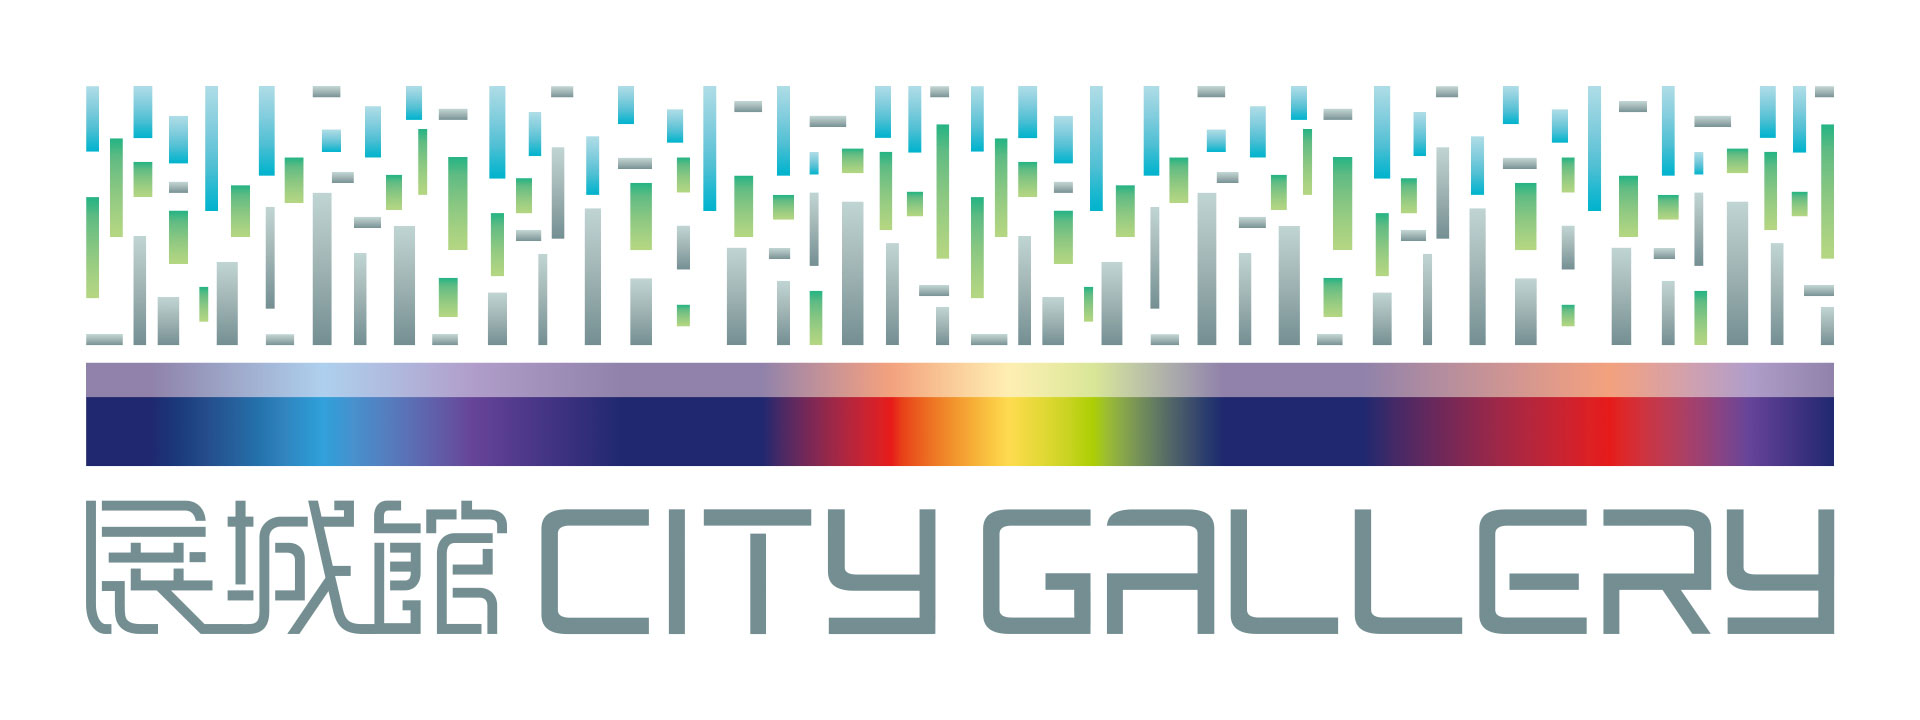 City Gallery Homepage